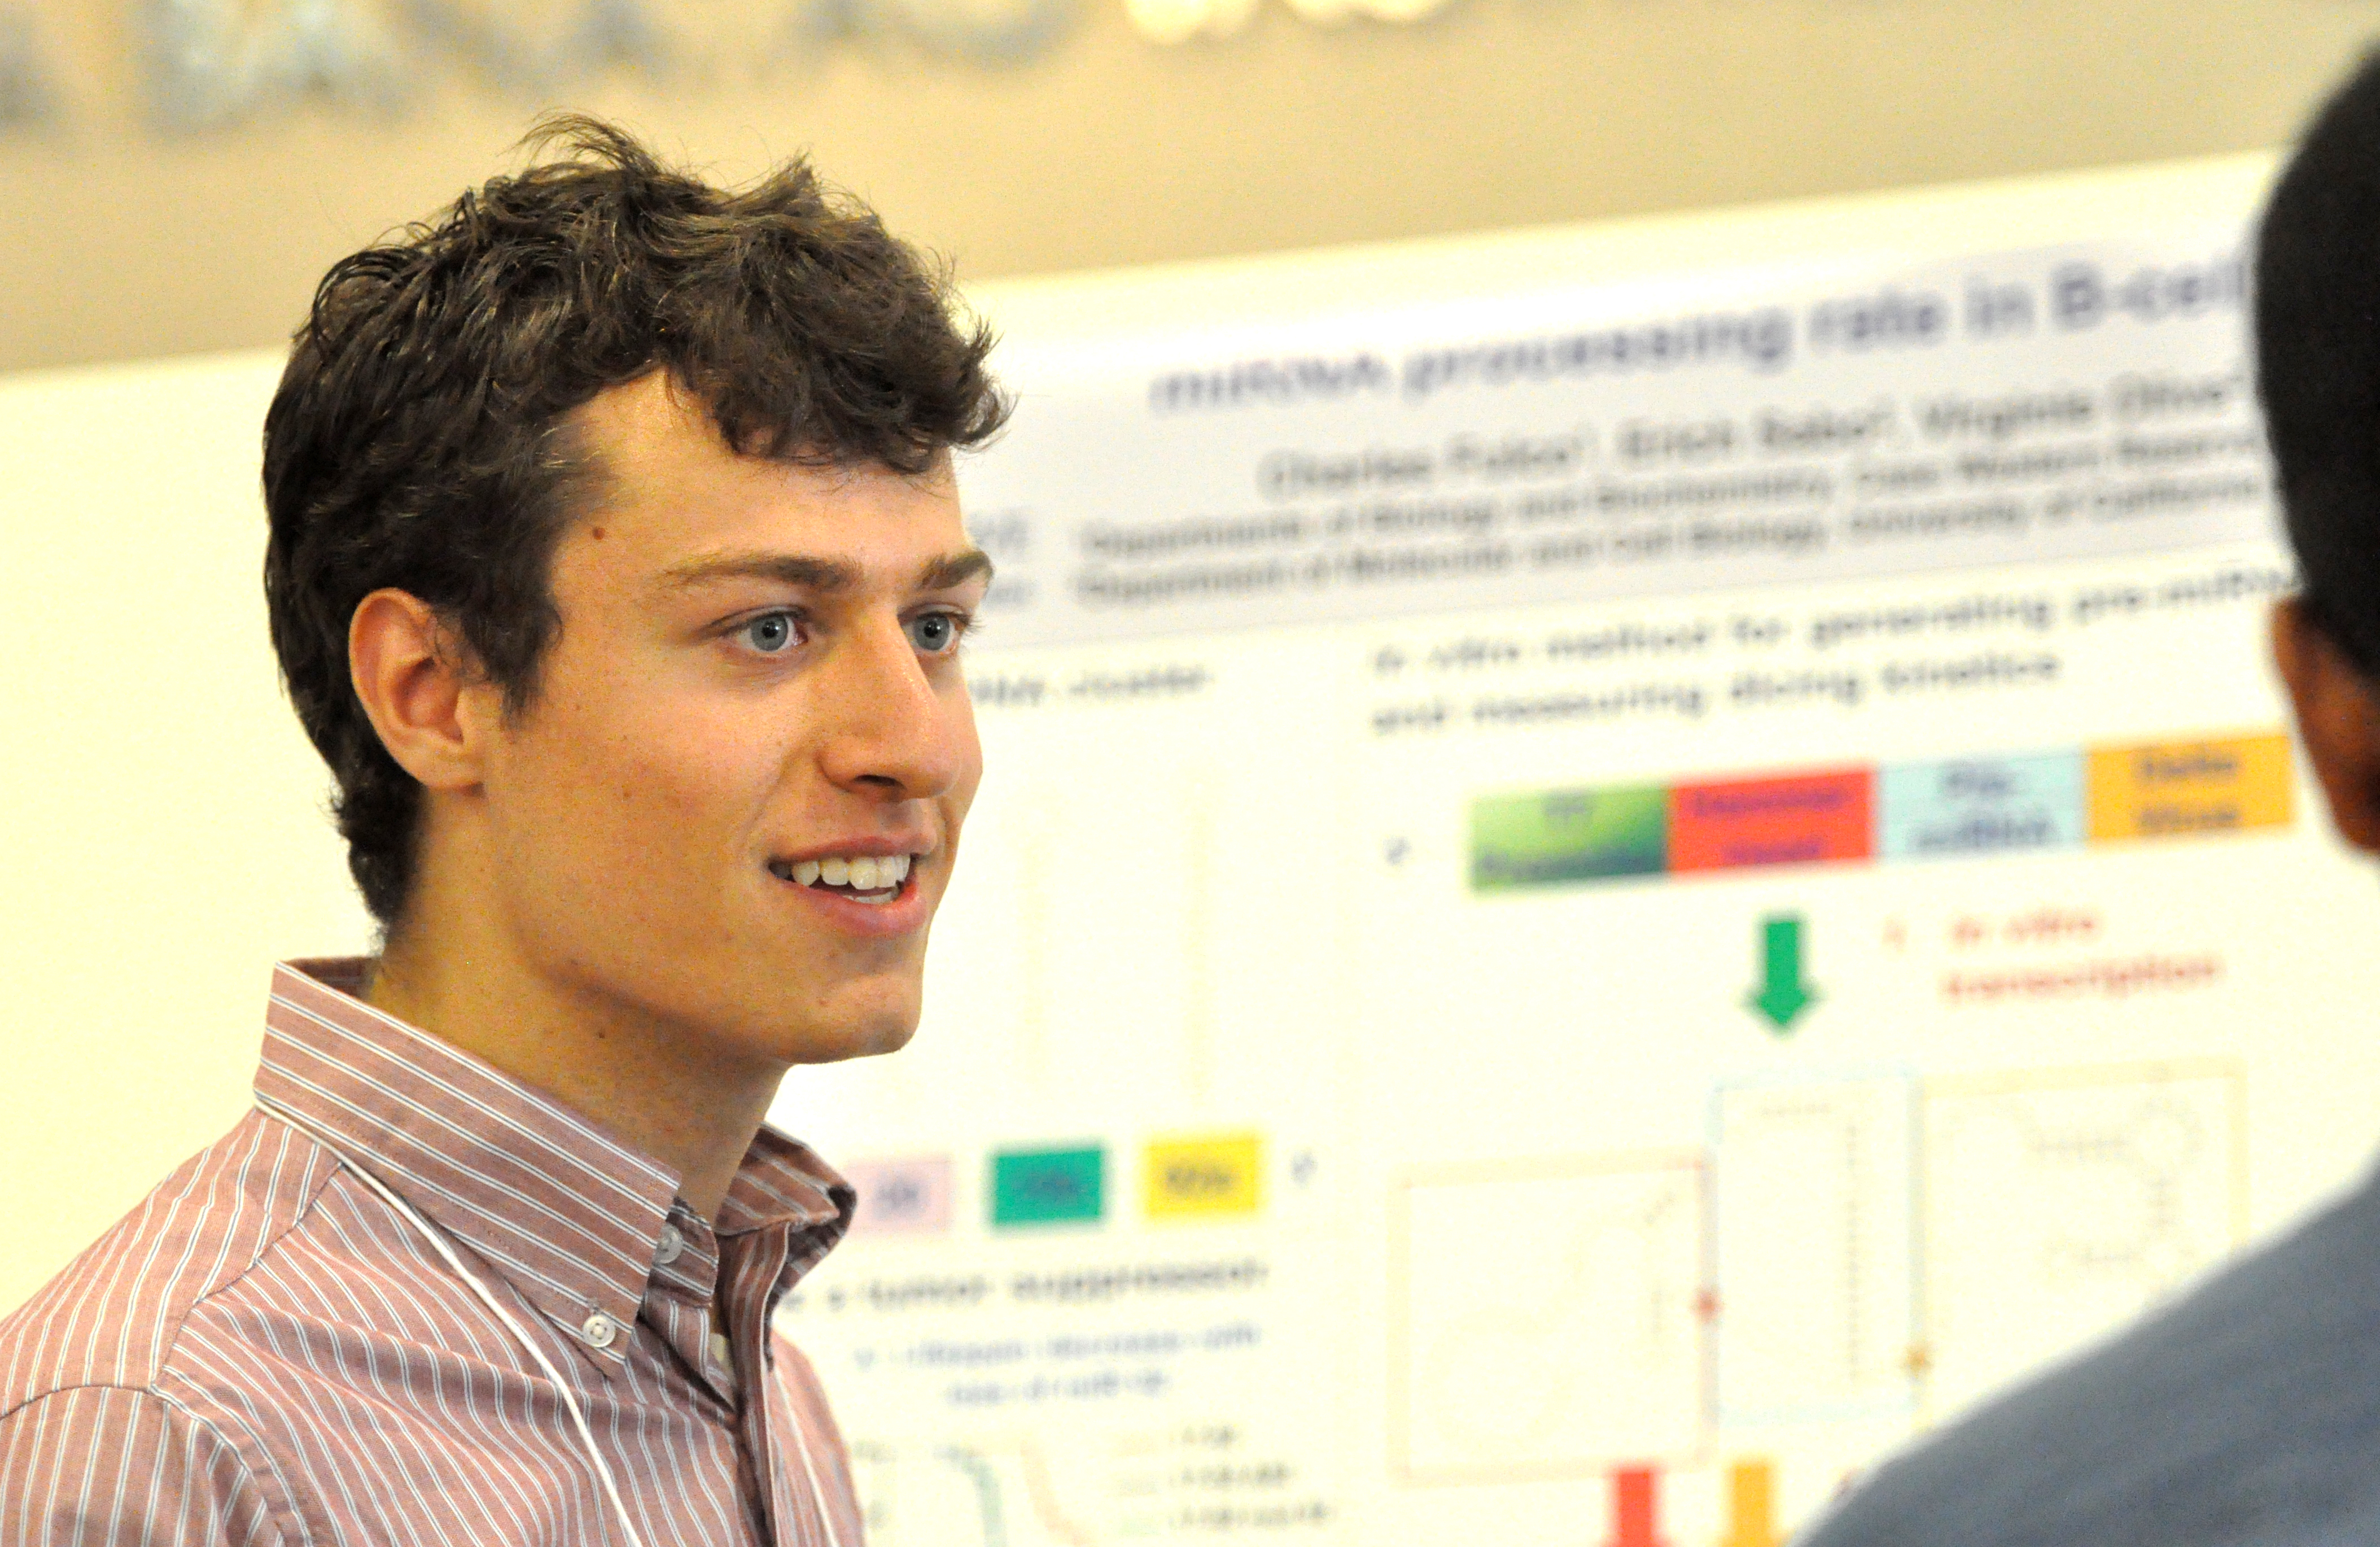 Tim Smith at the UCB Amgen Scholars Poster Session